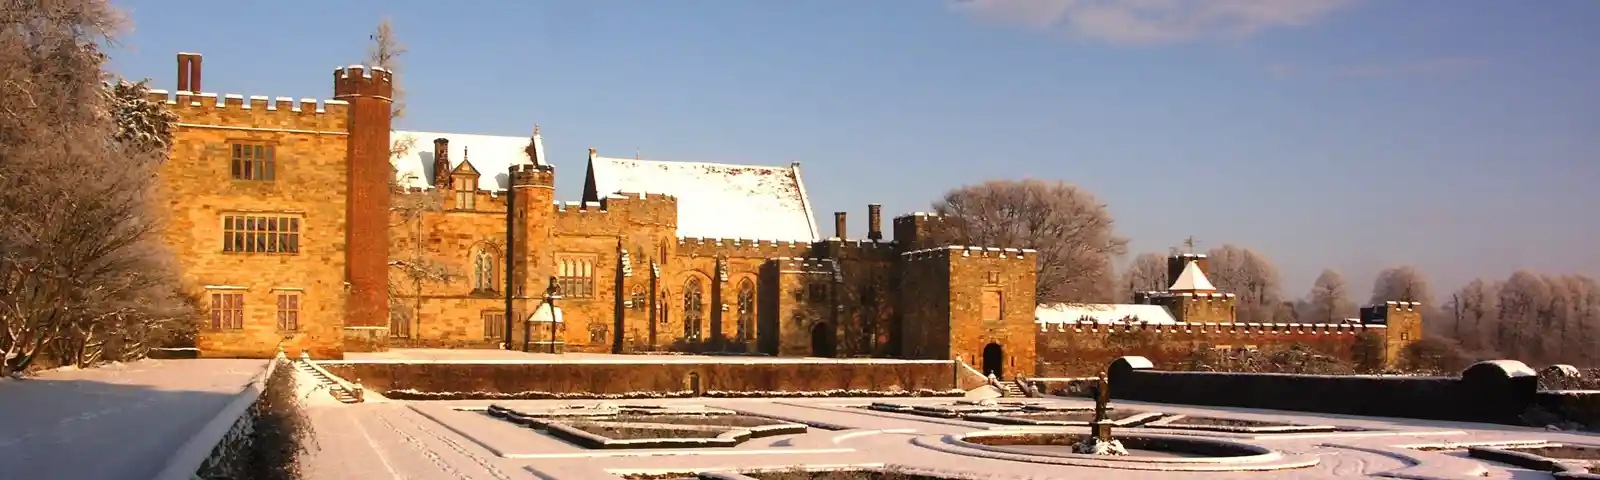 Penshurst Place In Snow